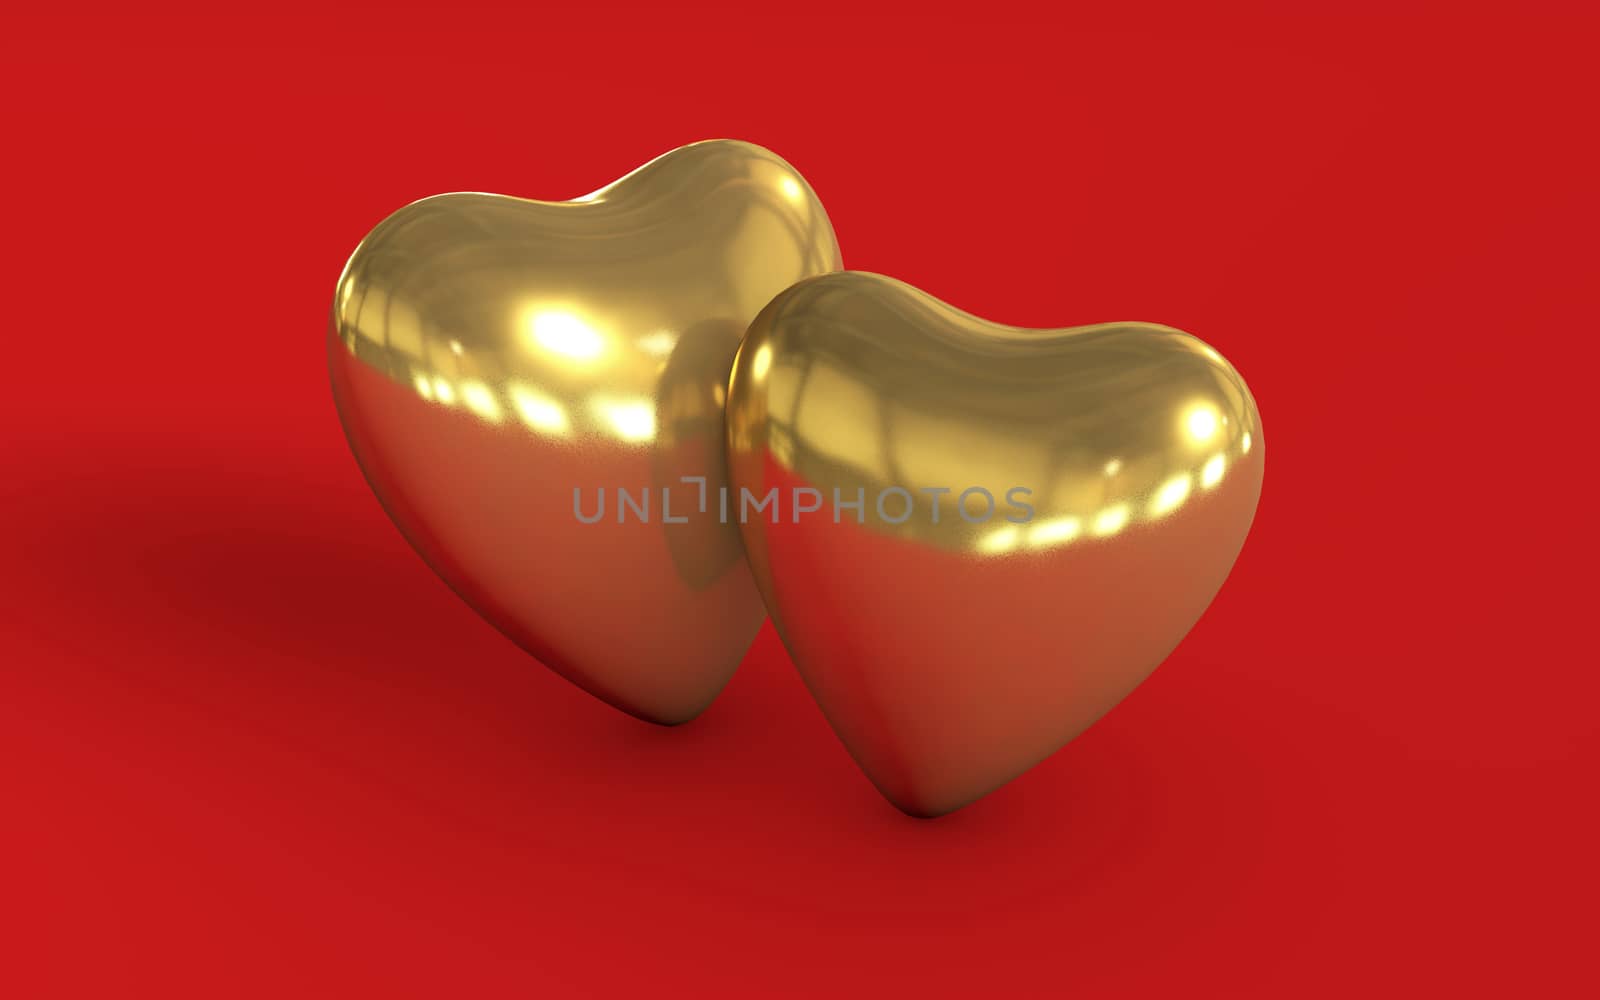 two golden hearts in love 3d rendered concept by F1b0nacci